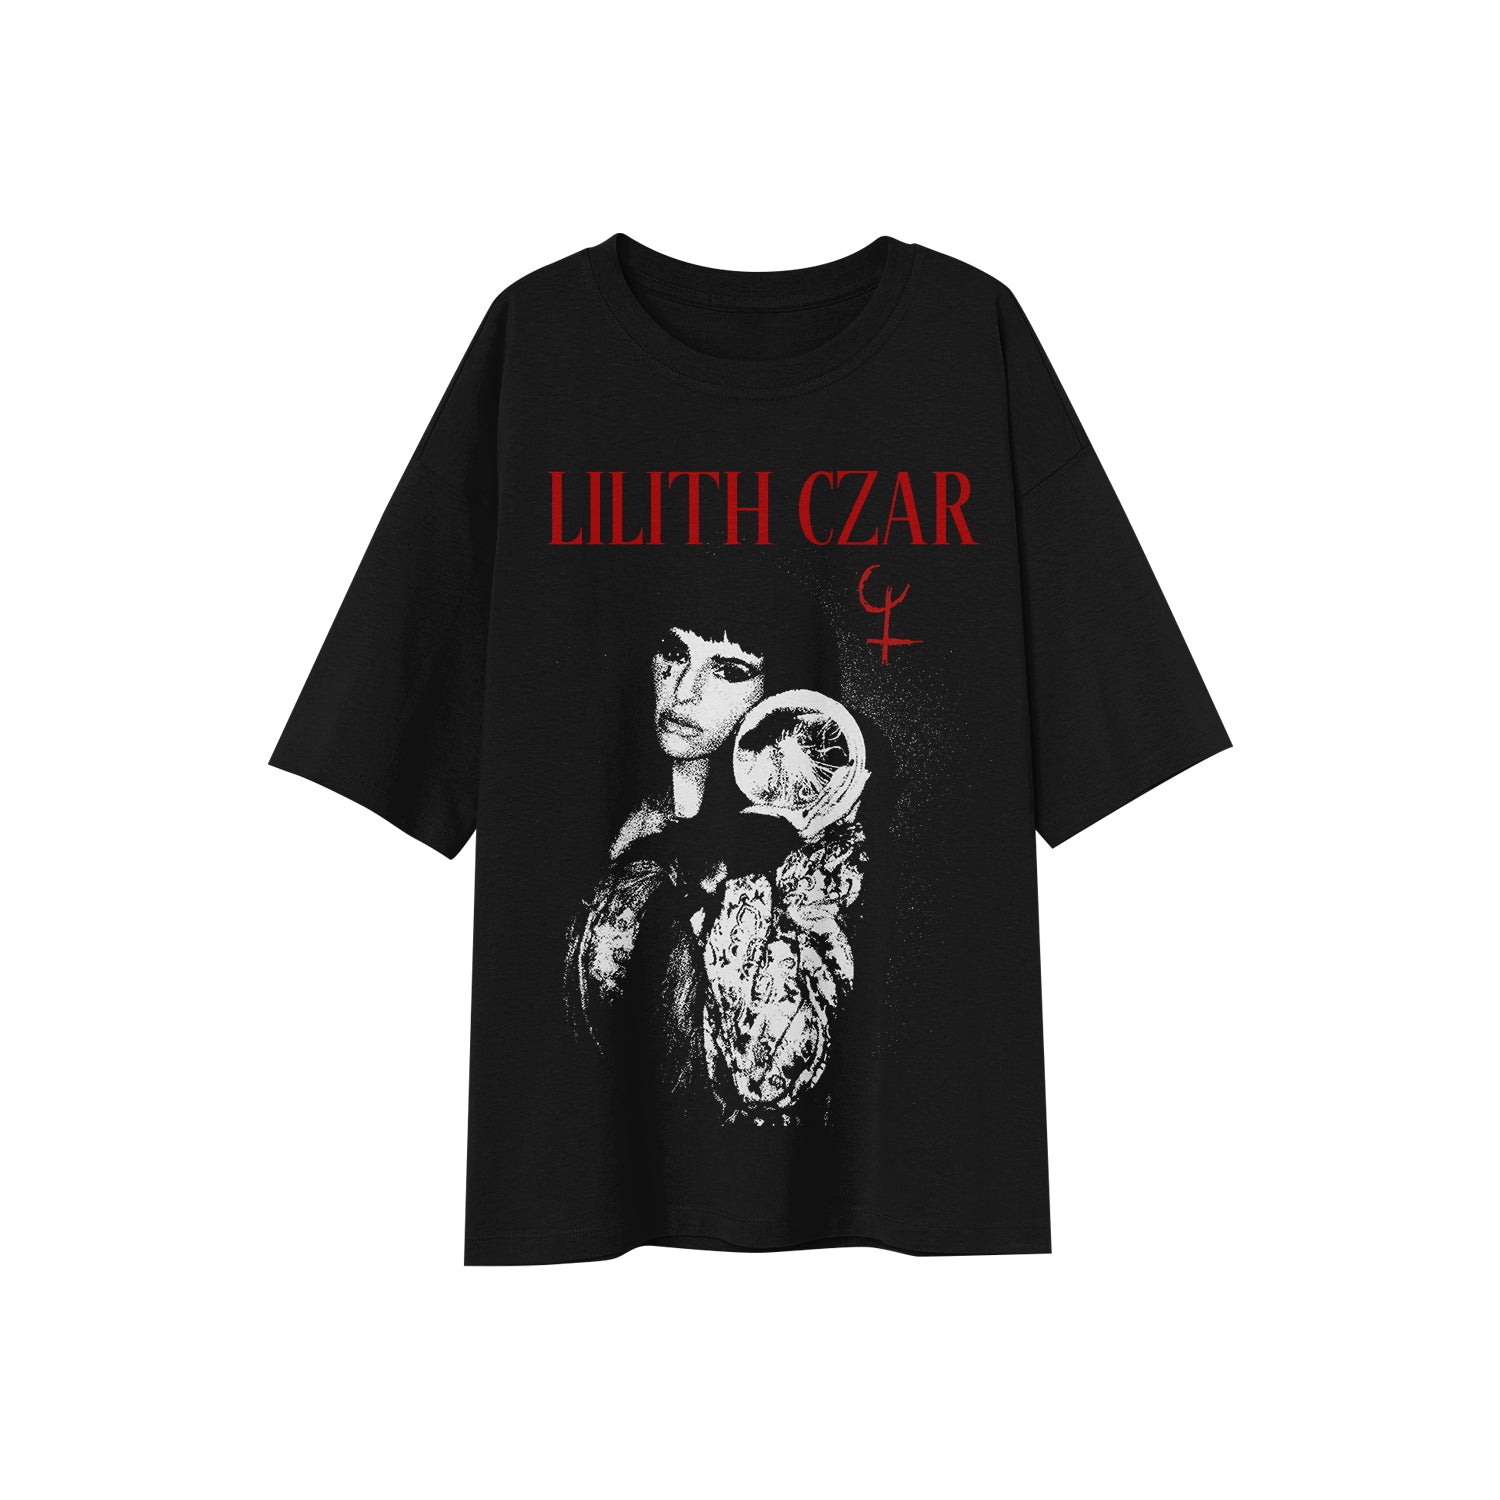 image of a black tee shirt on a white background. tee has full body print. at the top in red says lilith czar with her logo. below is a black and white image of lilith holding a crystal ball